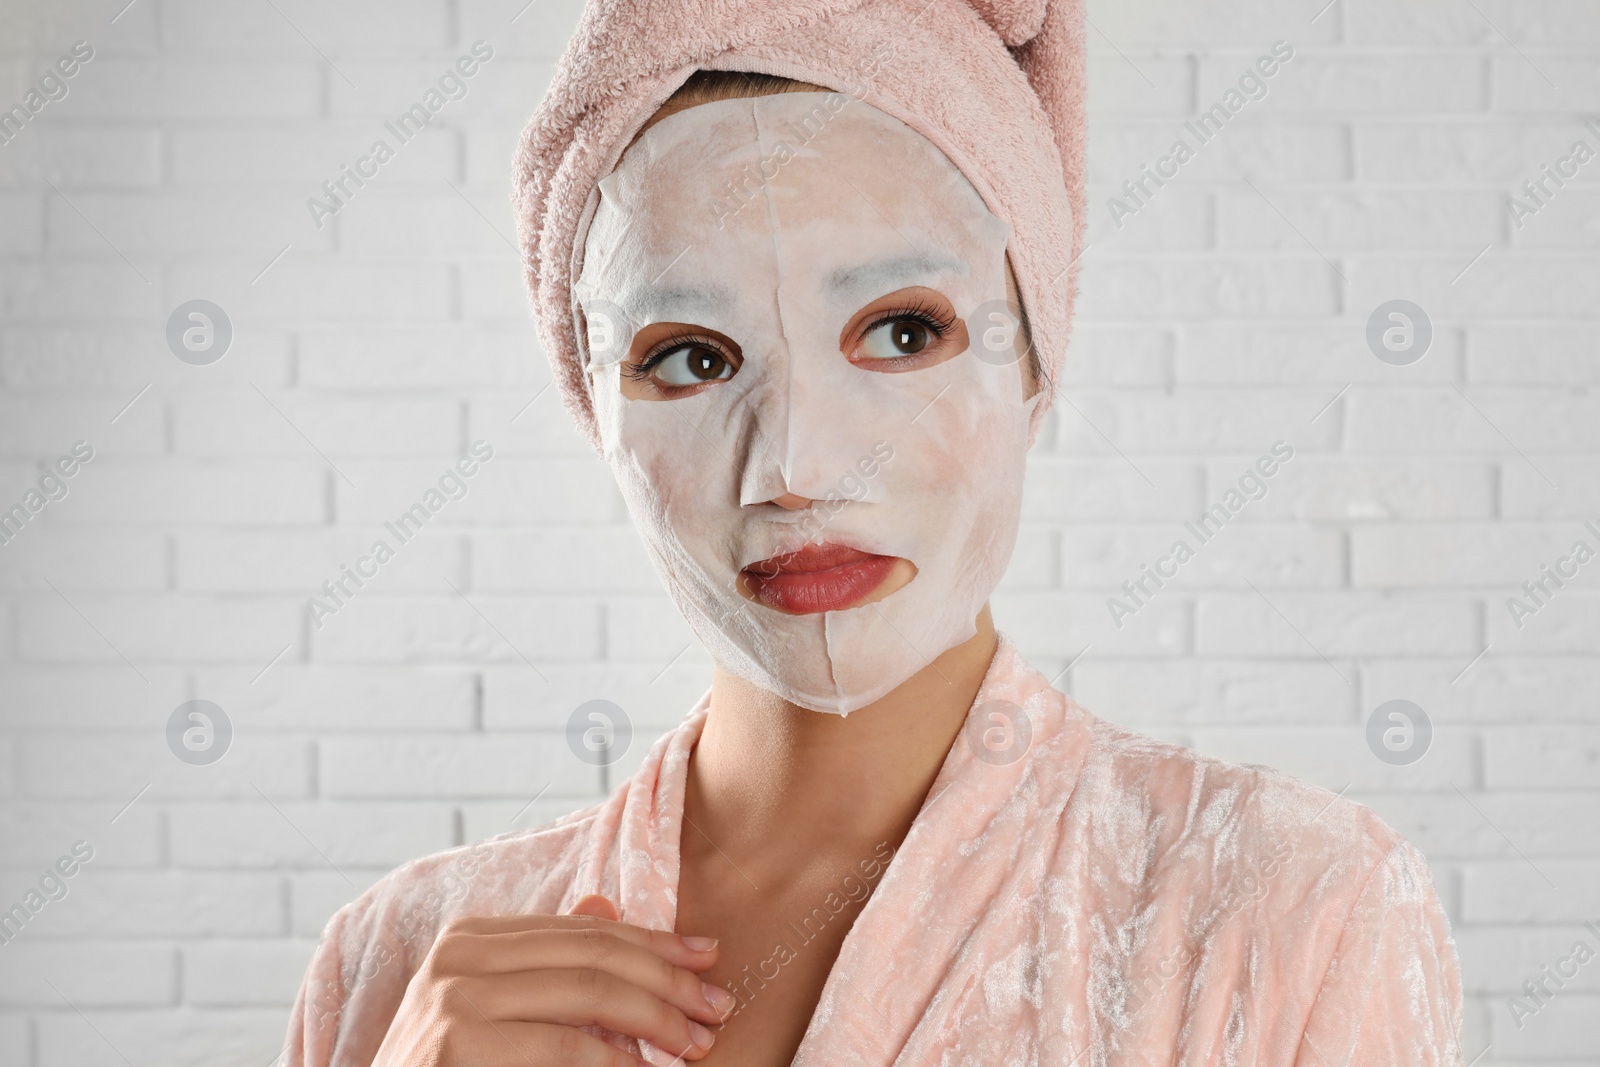 Photo of Young woman in bathrobe with cotton facial mask near white brick wall